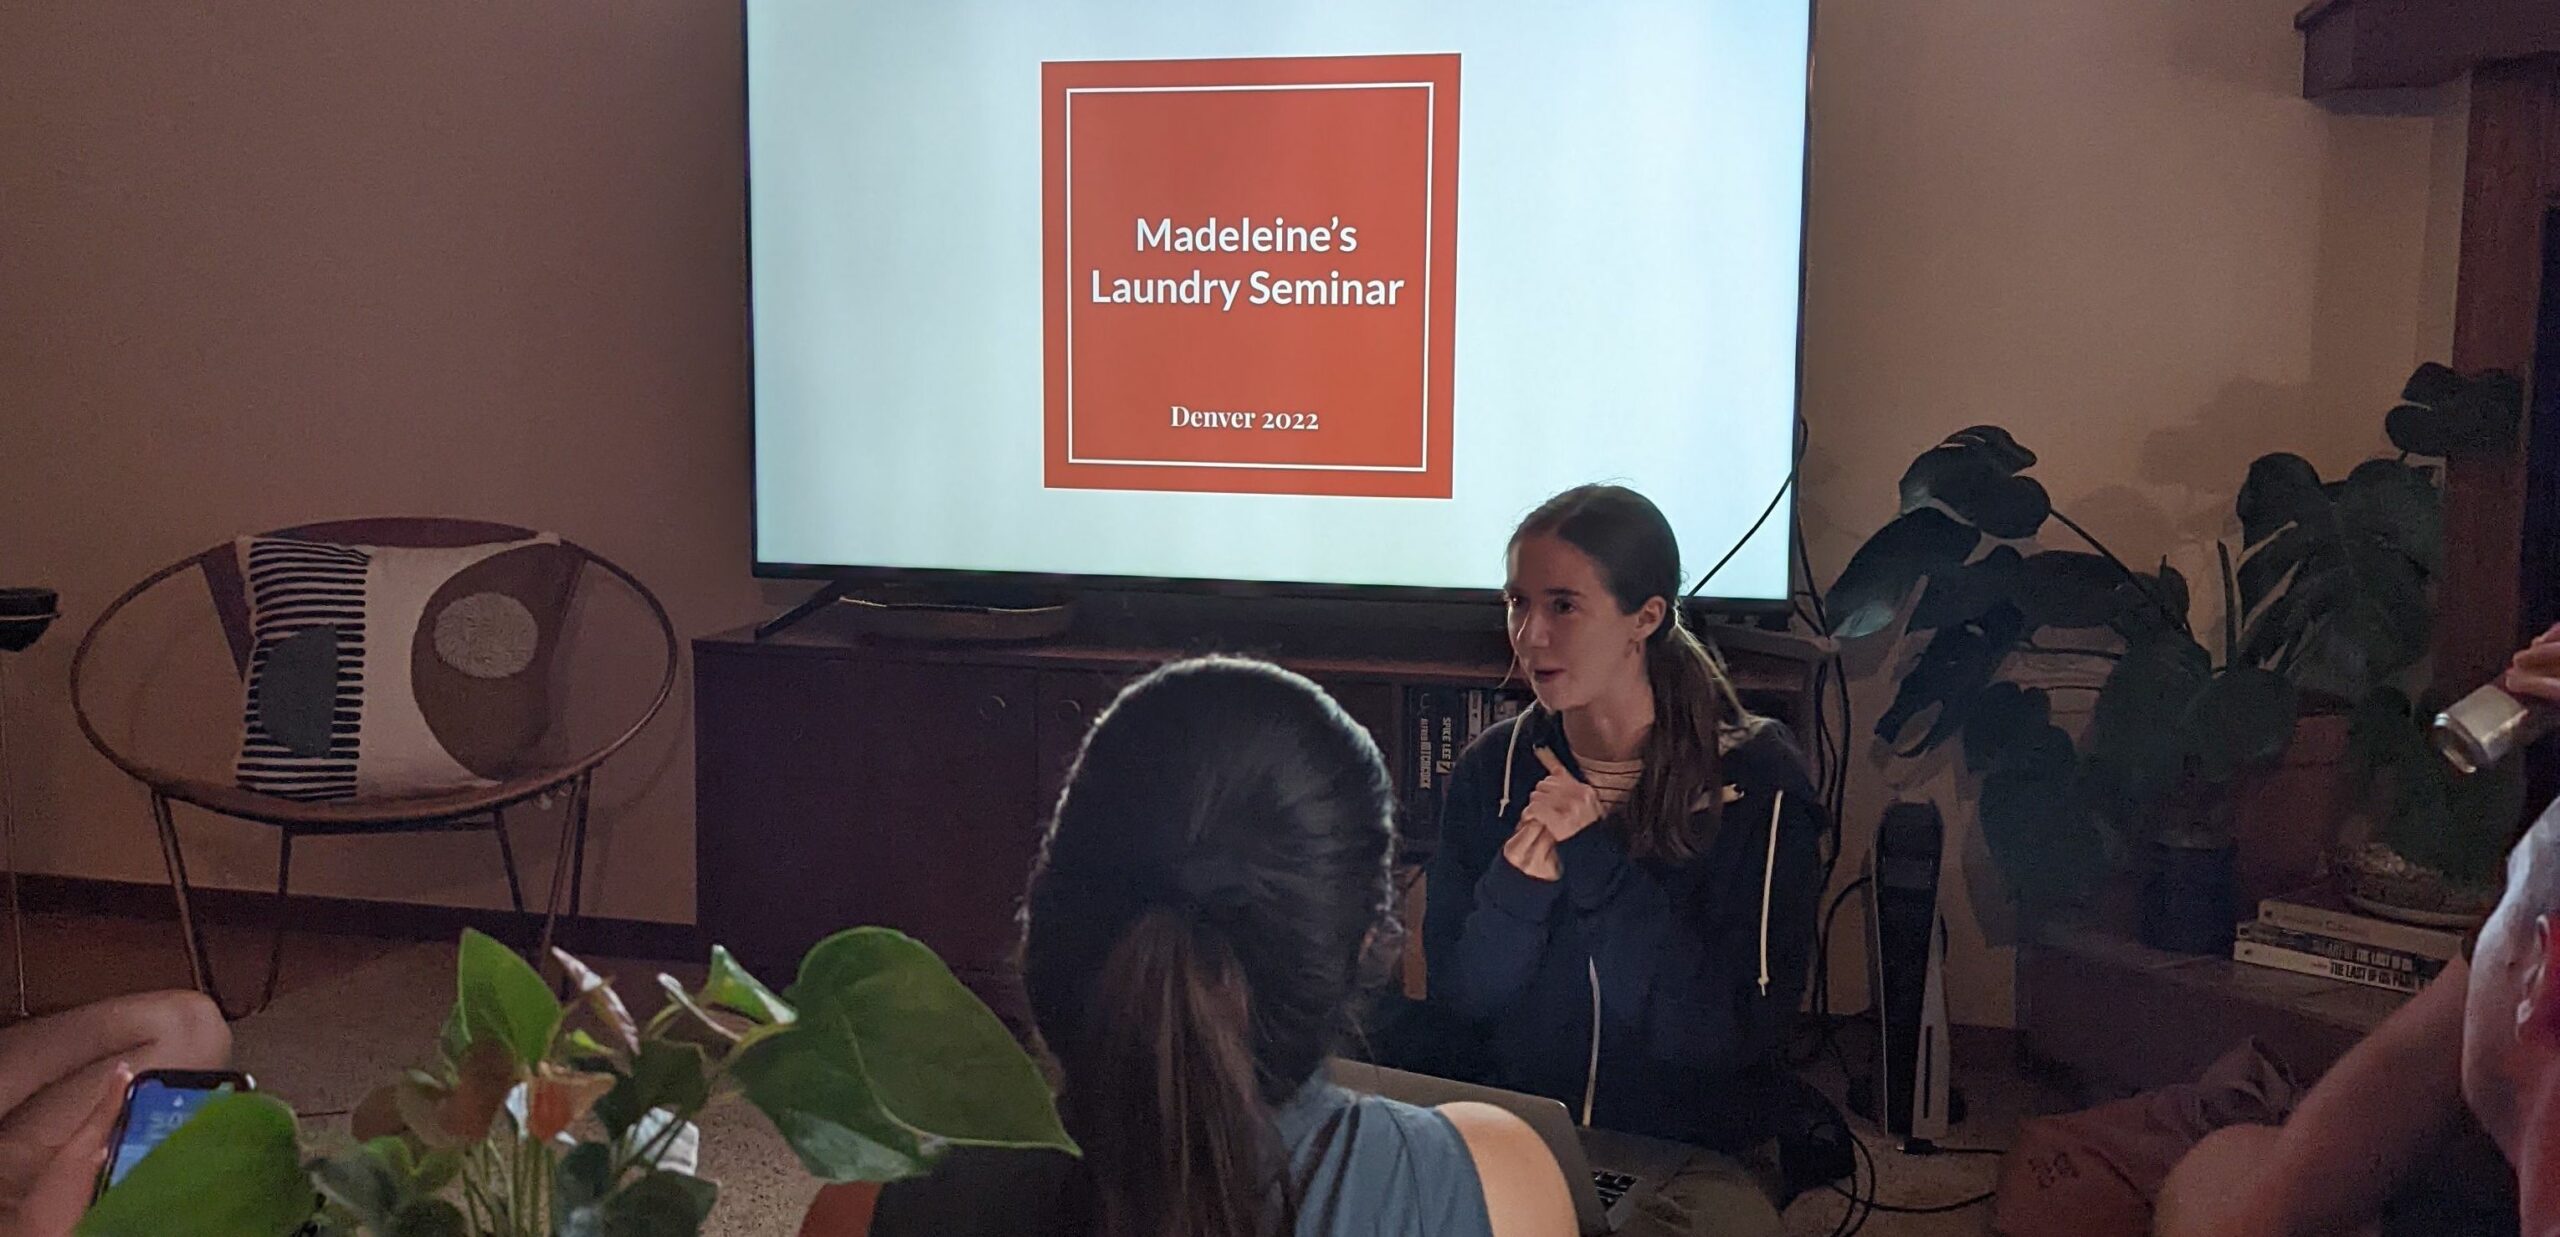 Picture of Madeleine sitting in front of a TV showing a slide projection titled 'Madeleine's Laundry Seminar'